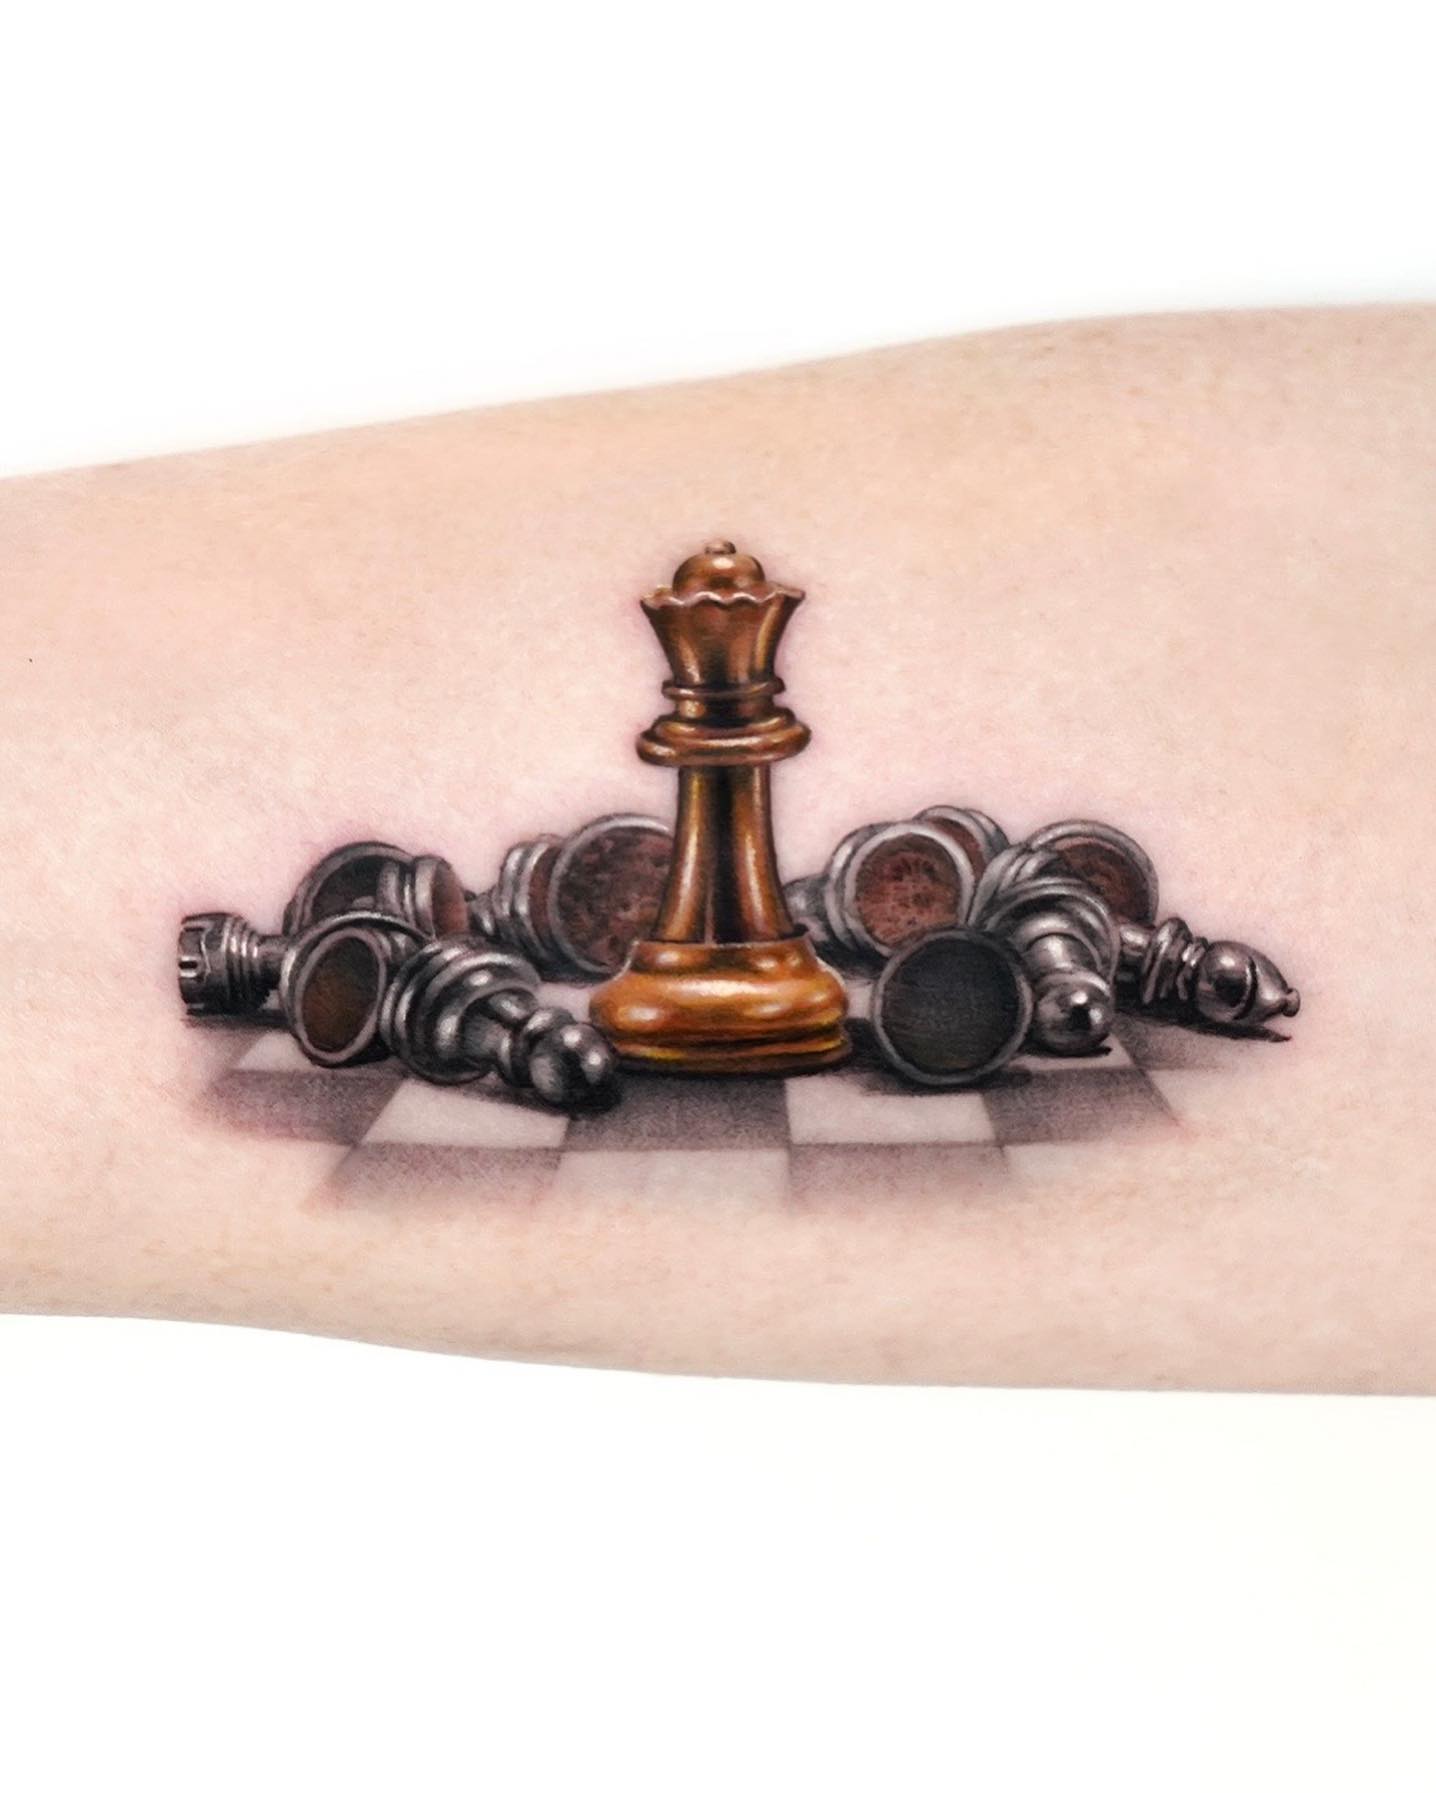 30+ Eye-Catching Chess Tattoo Ideas for Fans of the Royal Game